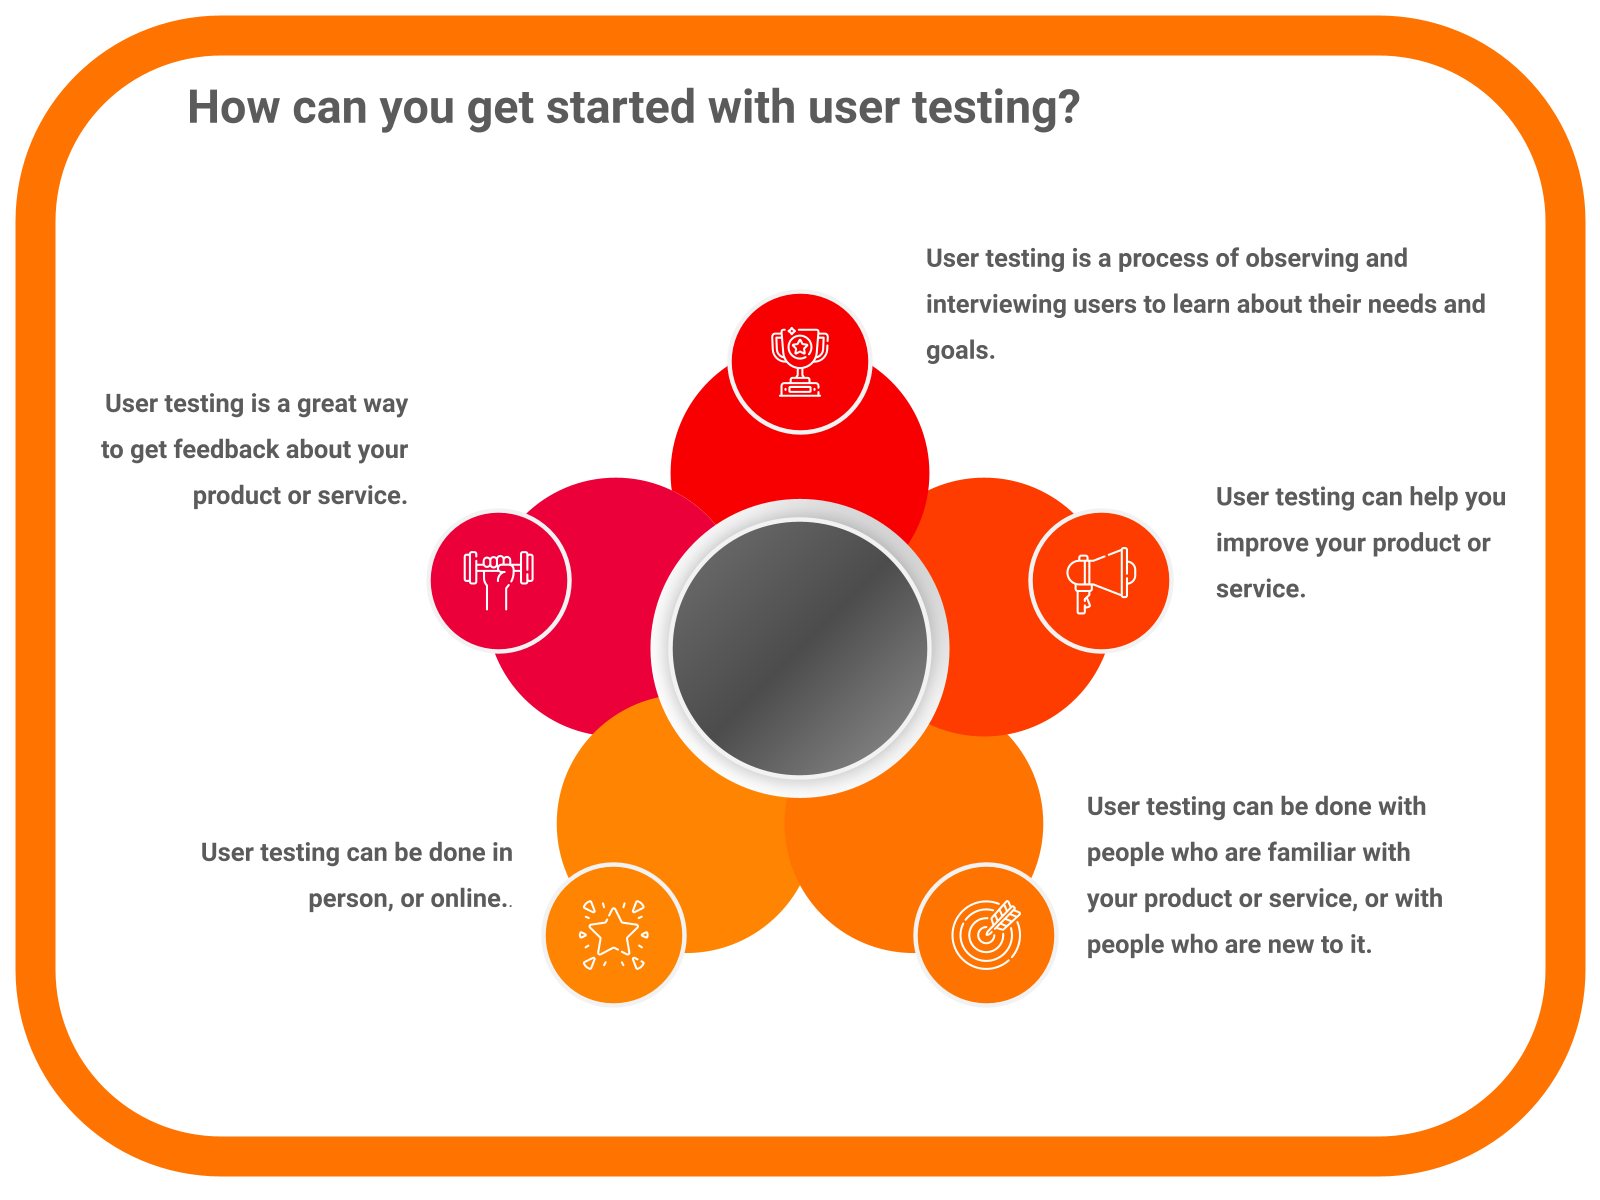 How can you get started with user testing?